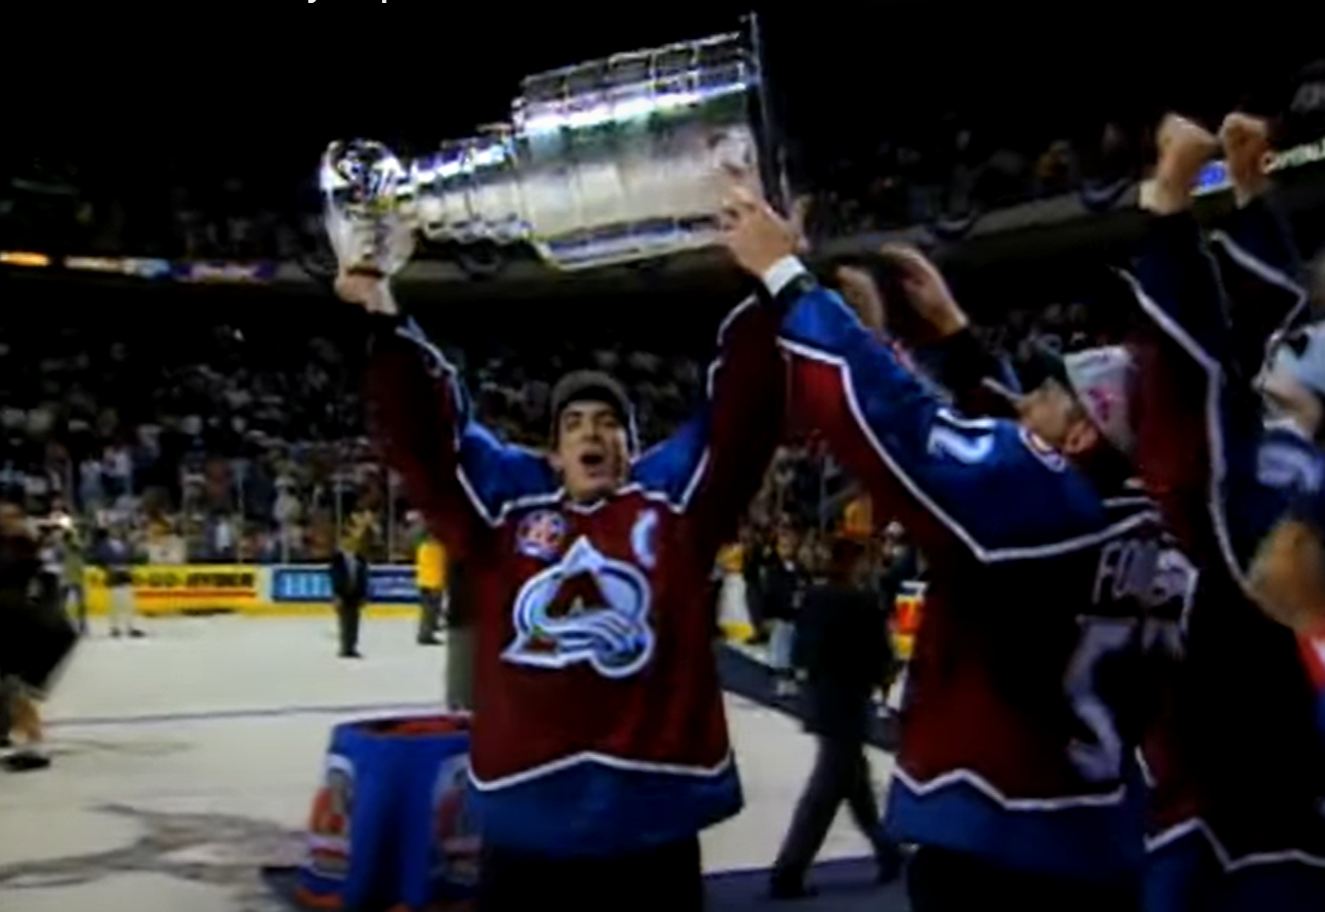 Never Summer Industries - 1996 The Colorado Avalanche win their first Stanley  Cup, in their first season, after their move WestBound to Colorado from  Quebec. . Concrete, certifiable, undeniable proof that magic